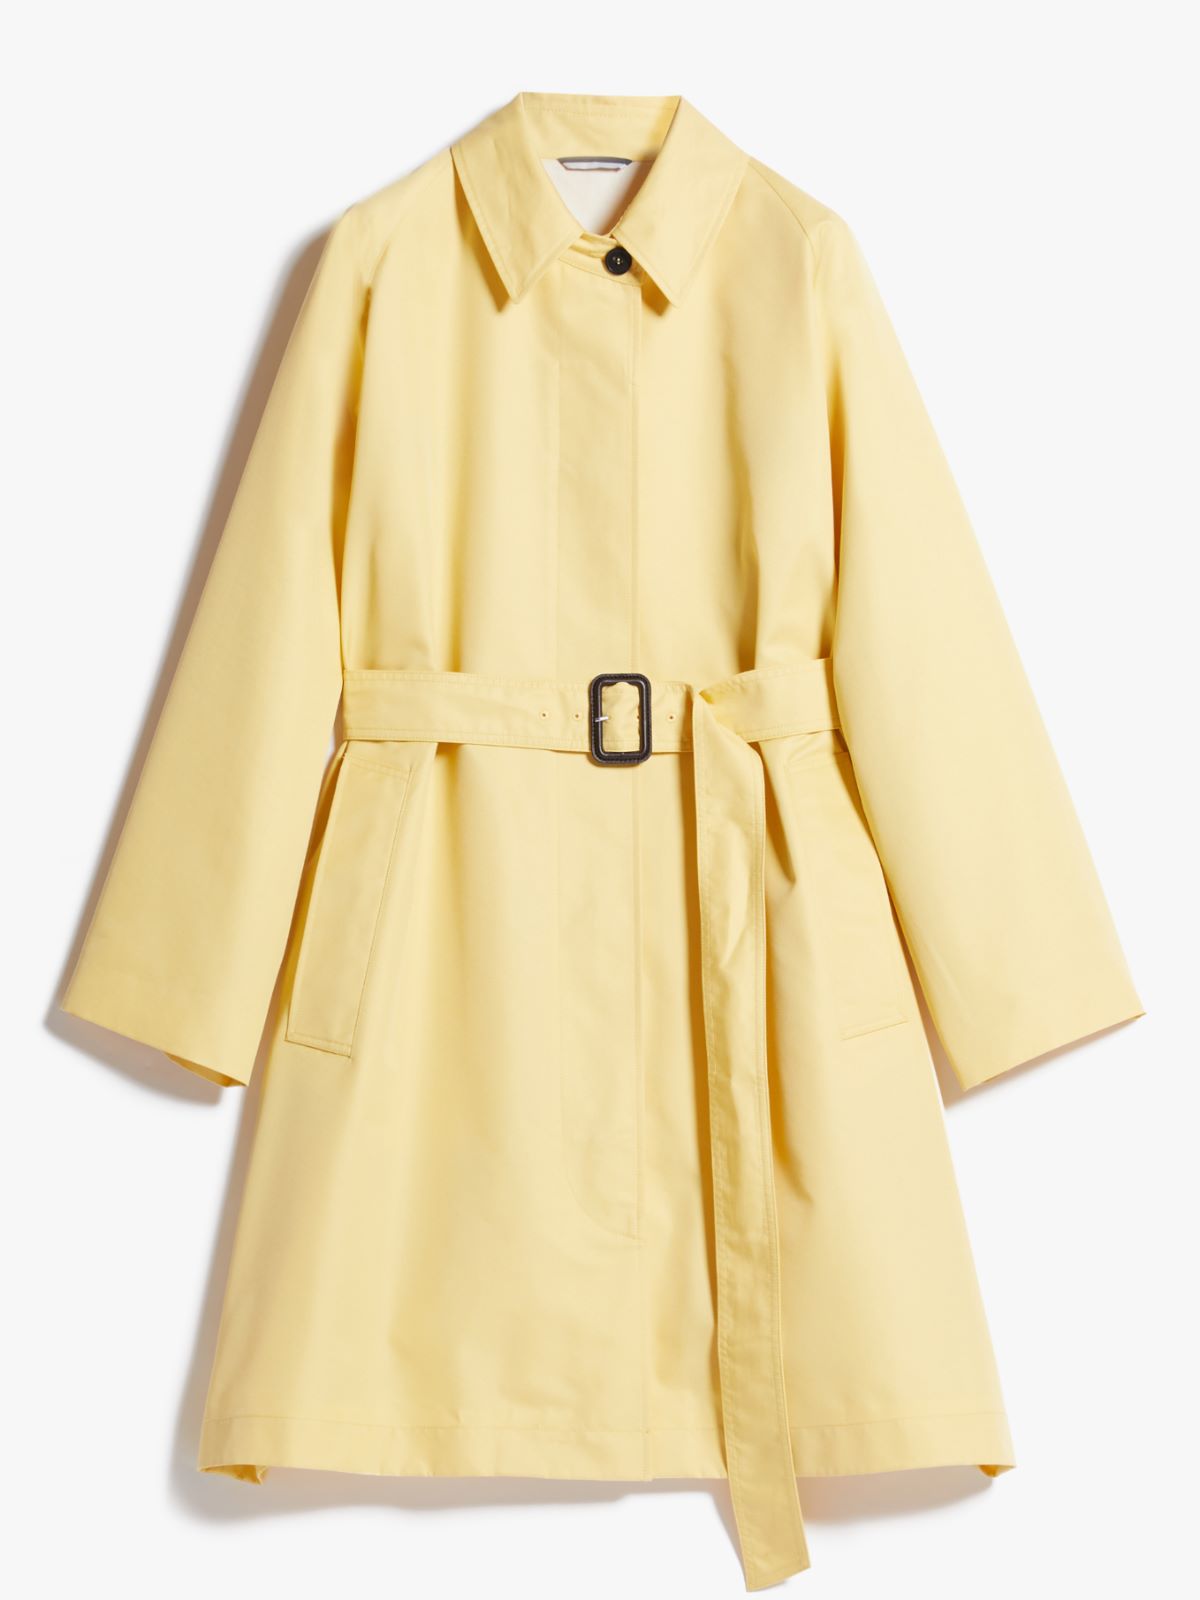 Water-resistant cotton trench coat - YELLOW - Weekend Max Mara - 6